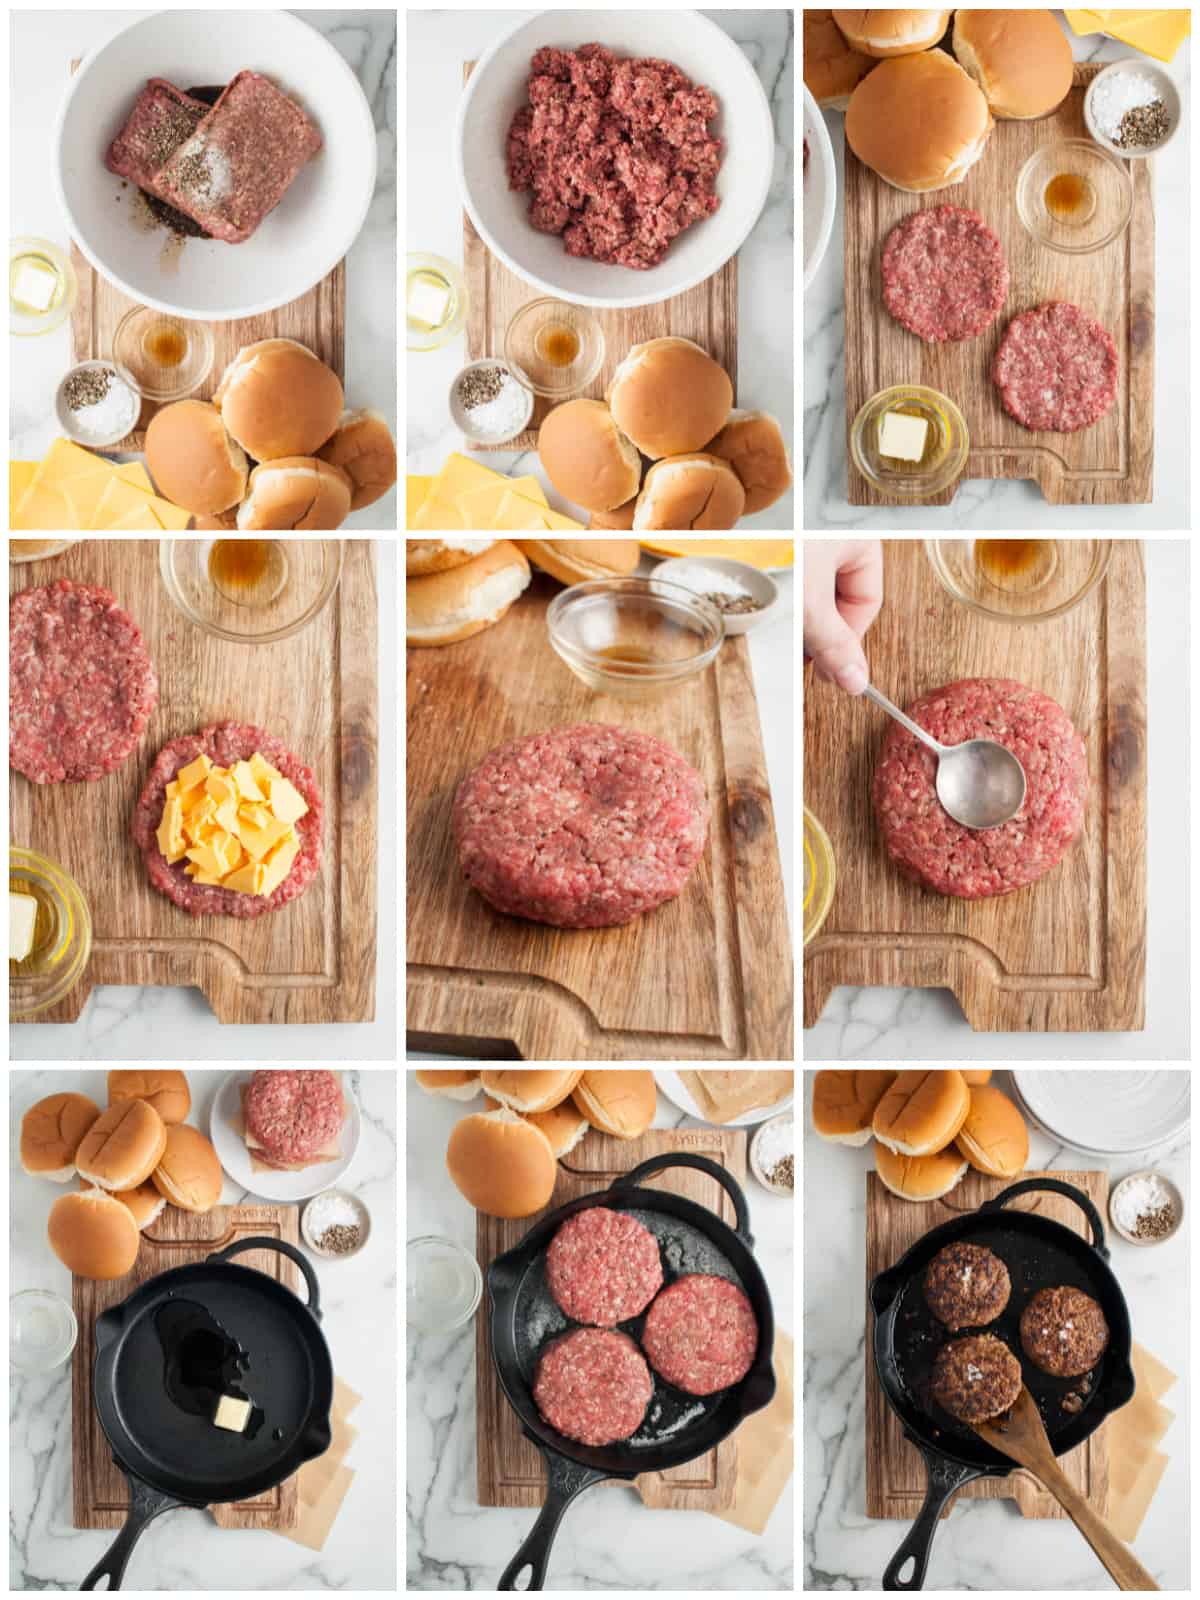 Step by step photos on how to make a Juicy Lucy Recipe.